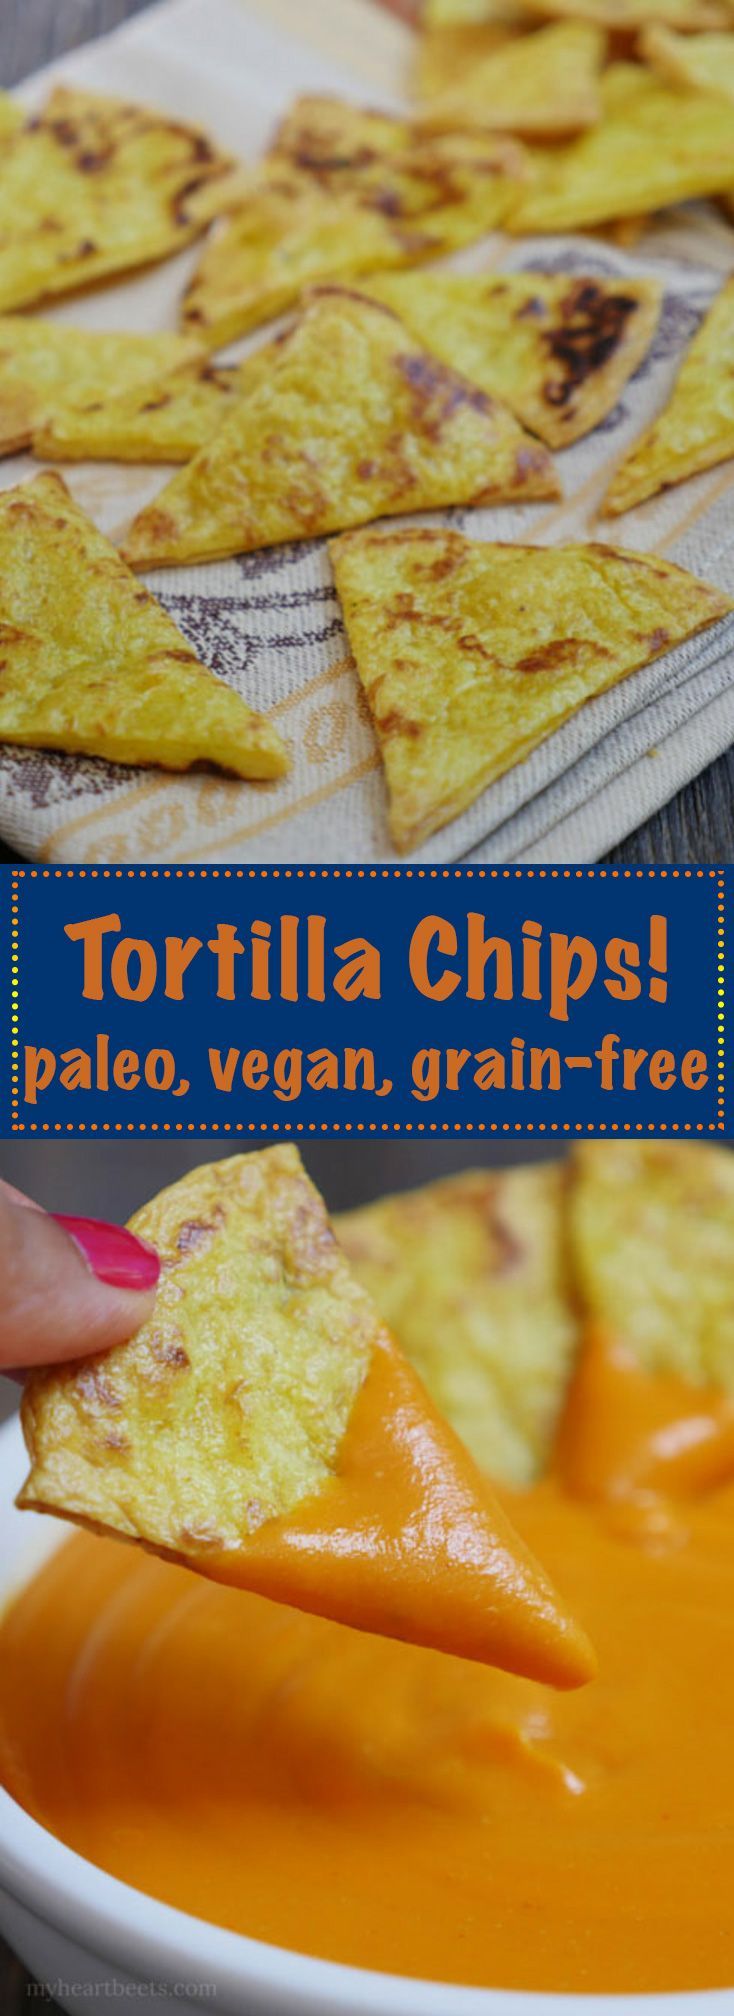 Paleo Tortilla Chips by MyHeartBeets.com